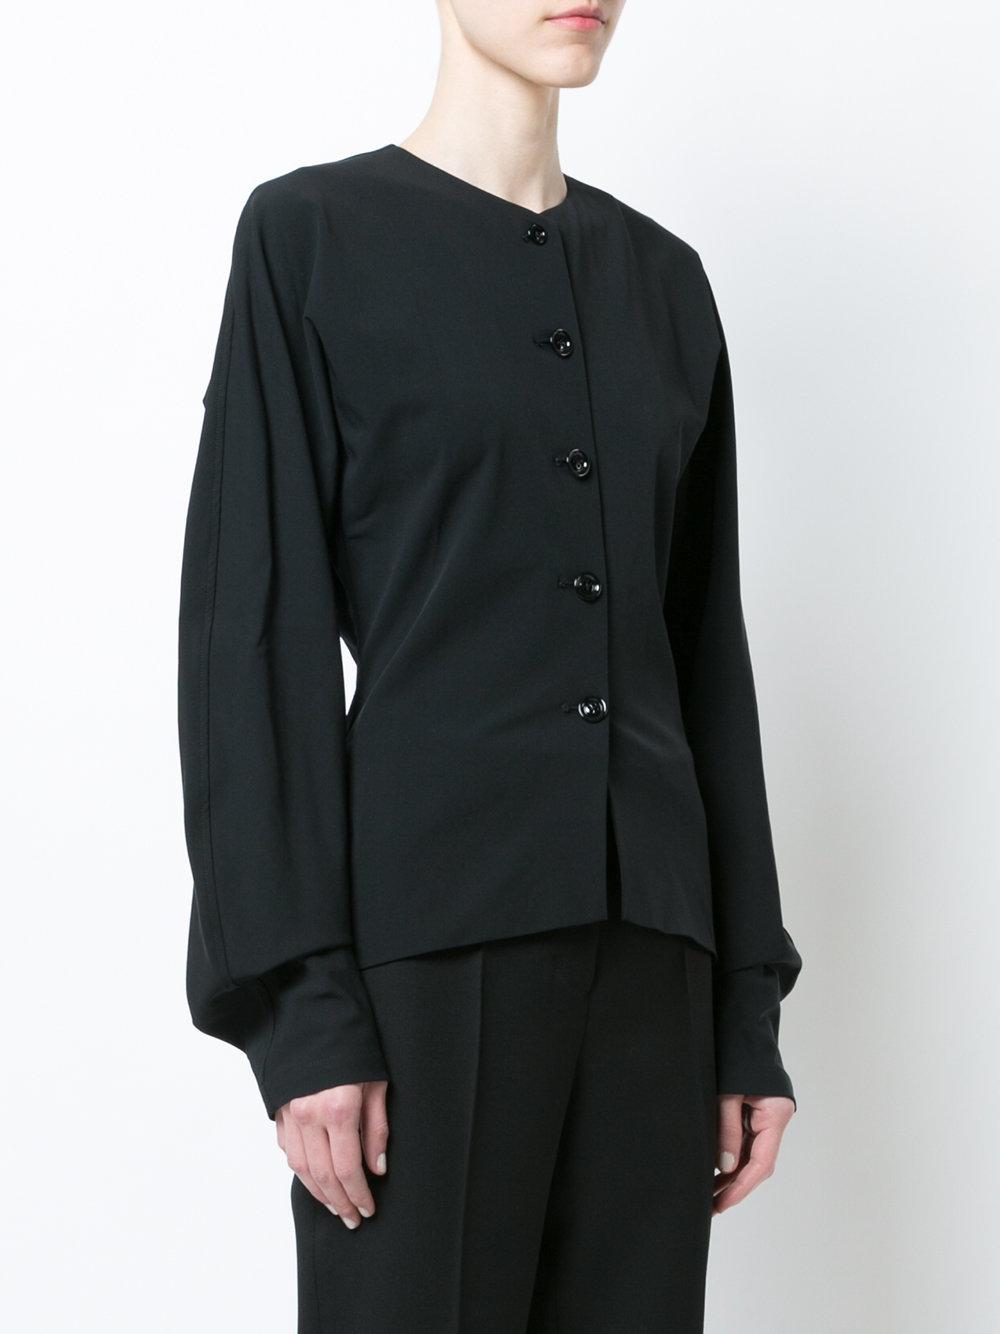 Lemaire Wool Slim-fit Buttoned Blouse in Black - Lyst